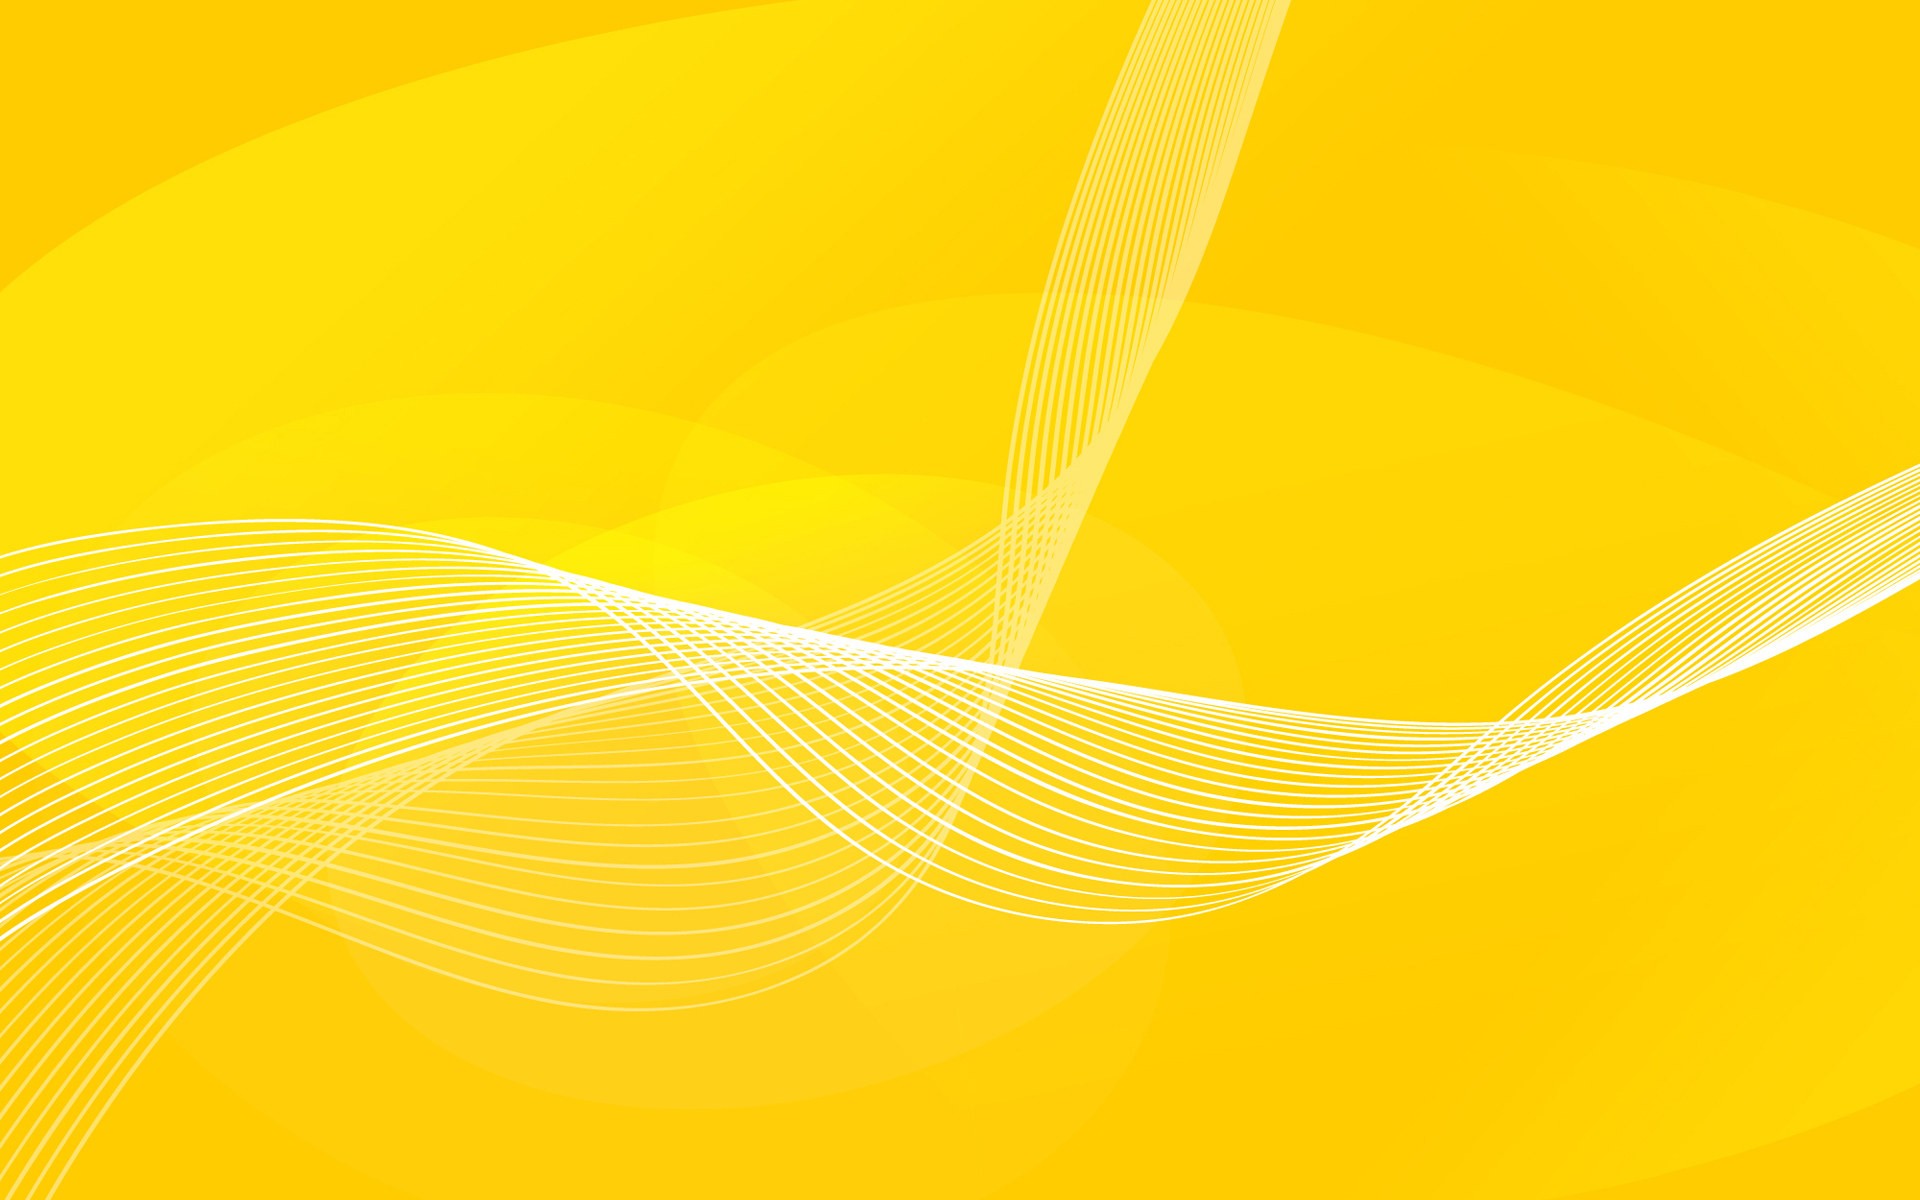  1920x1200 Yellow Background Browser Themes Desktop Background 1920x1200